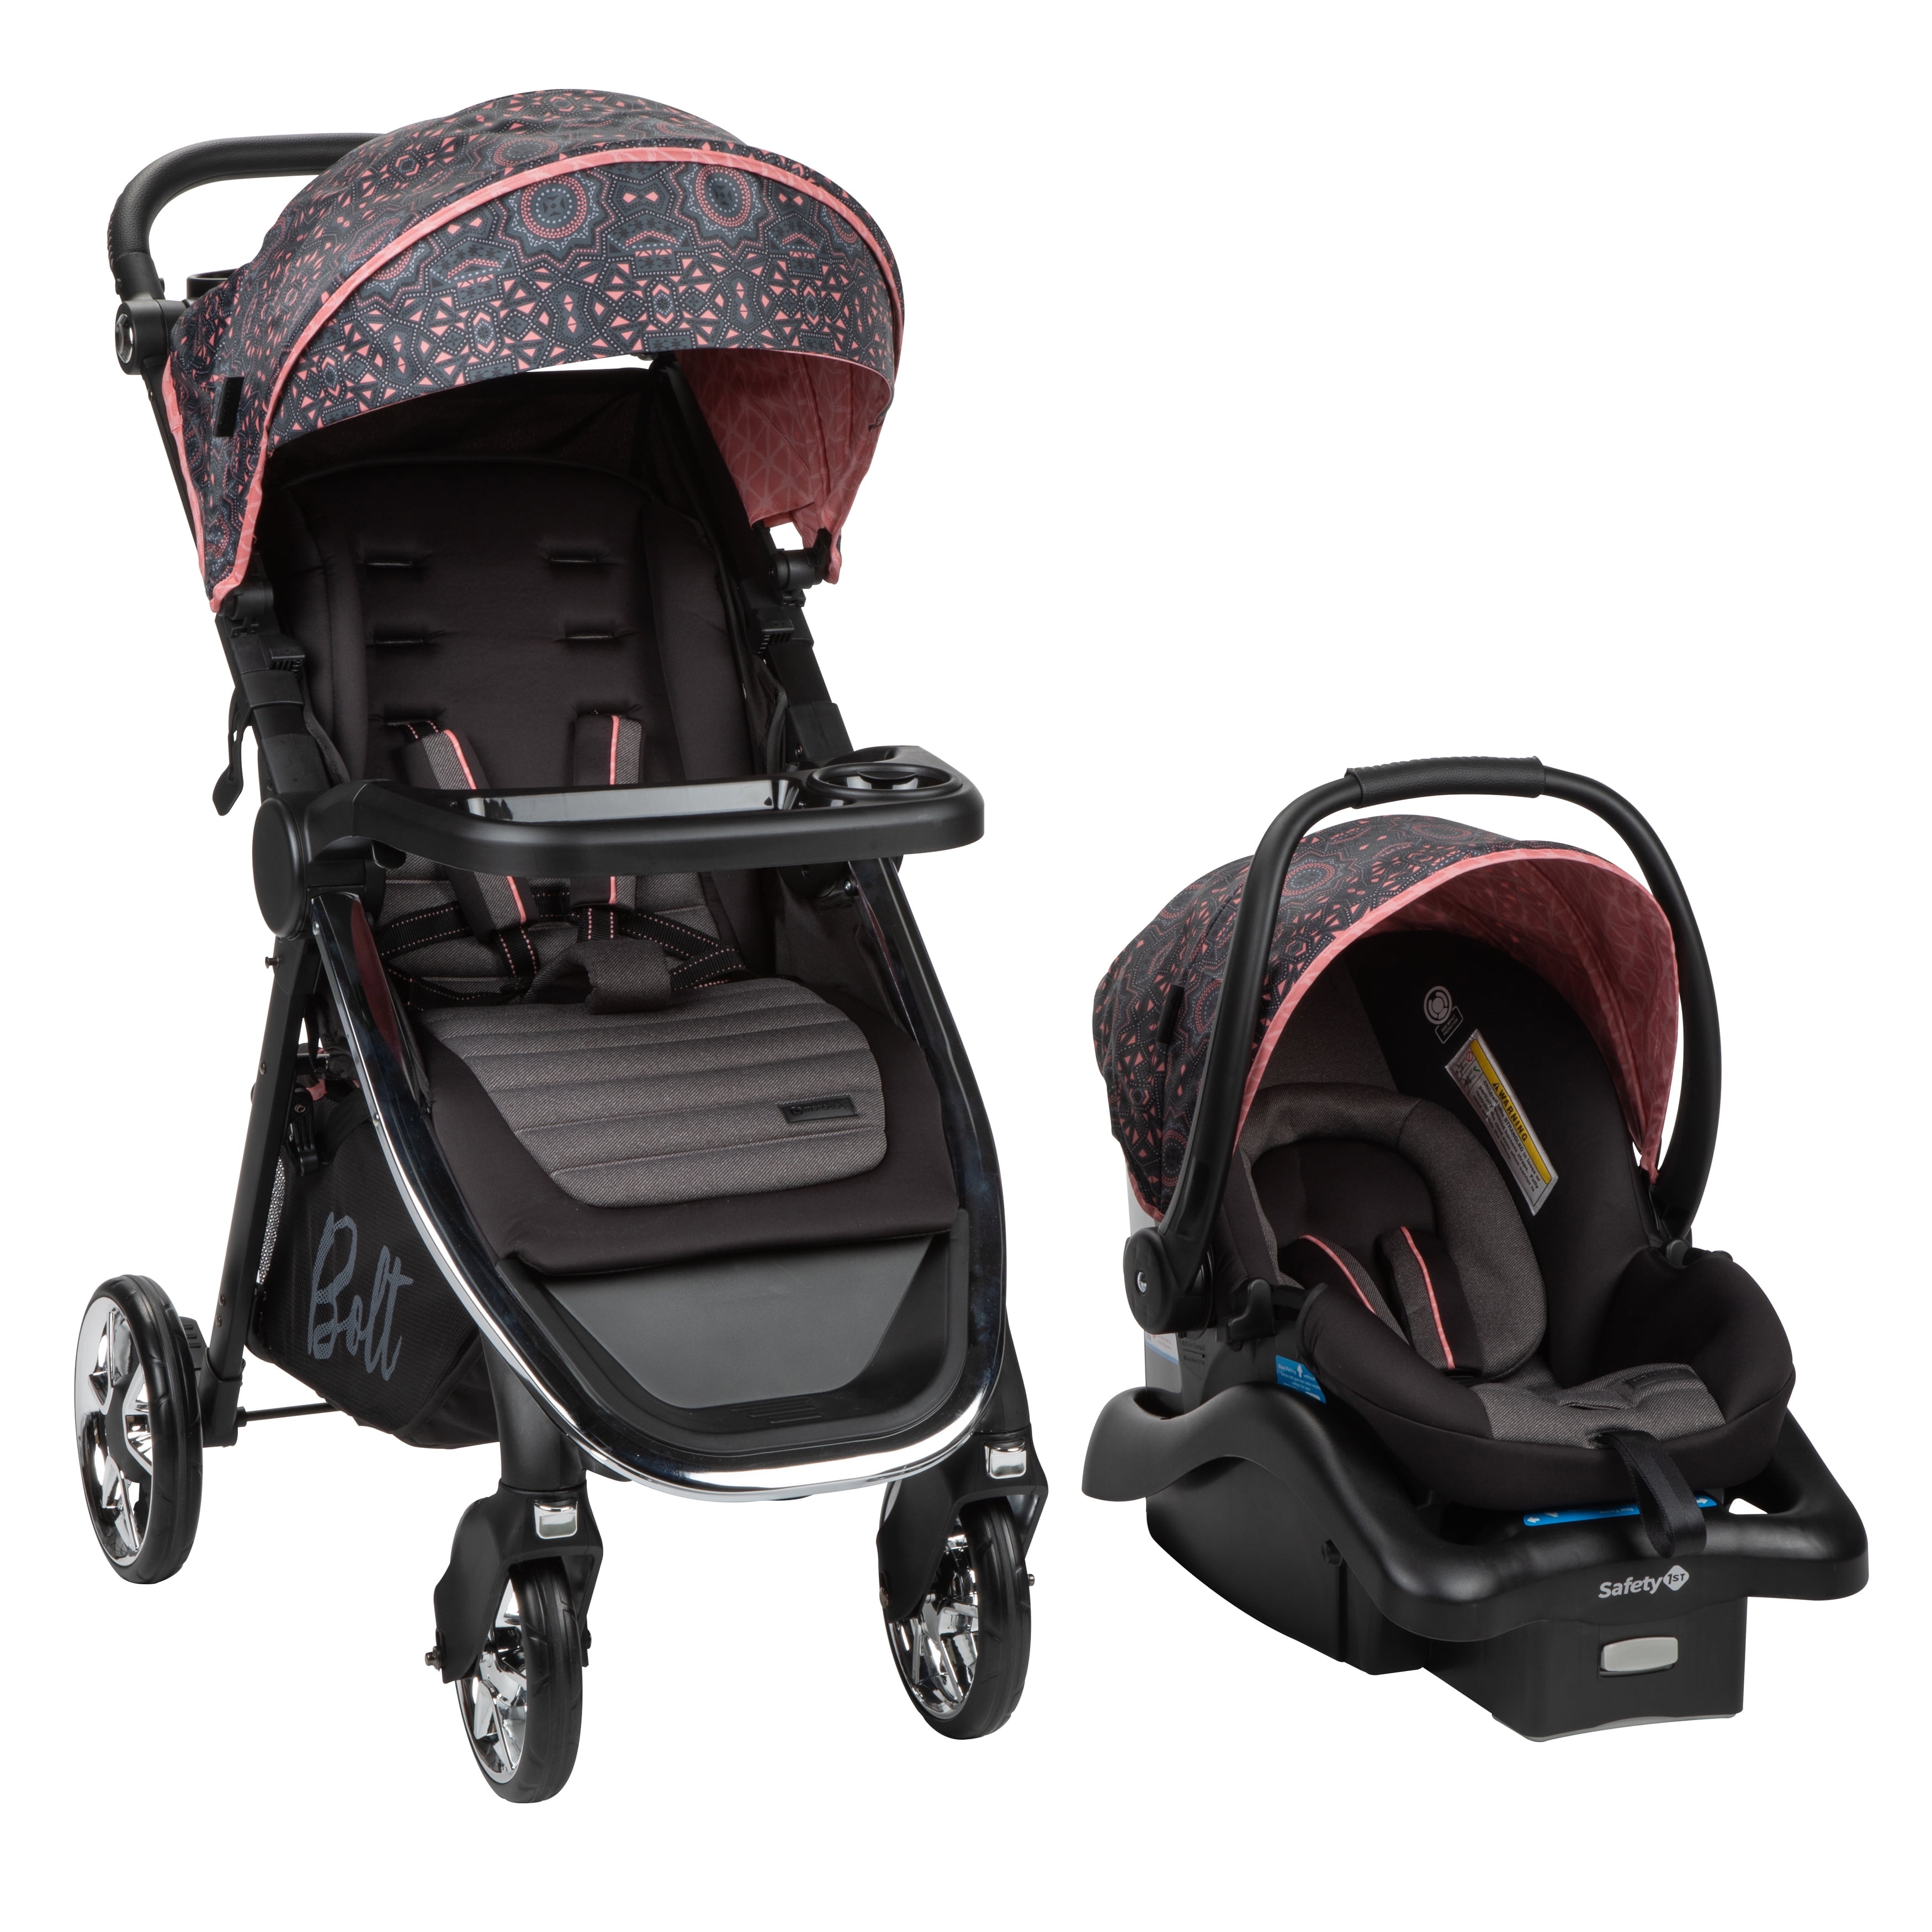 Car seat stroller takes on travel woes